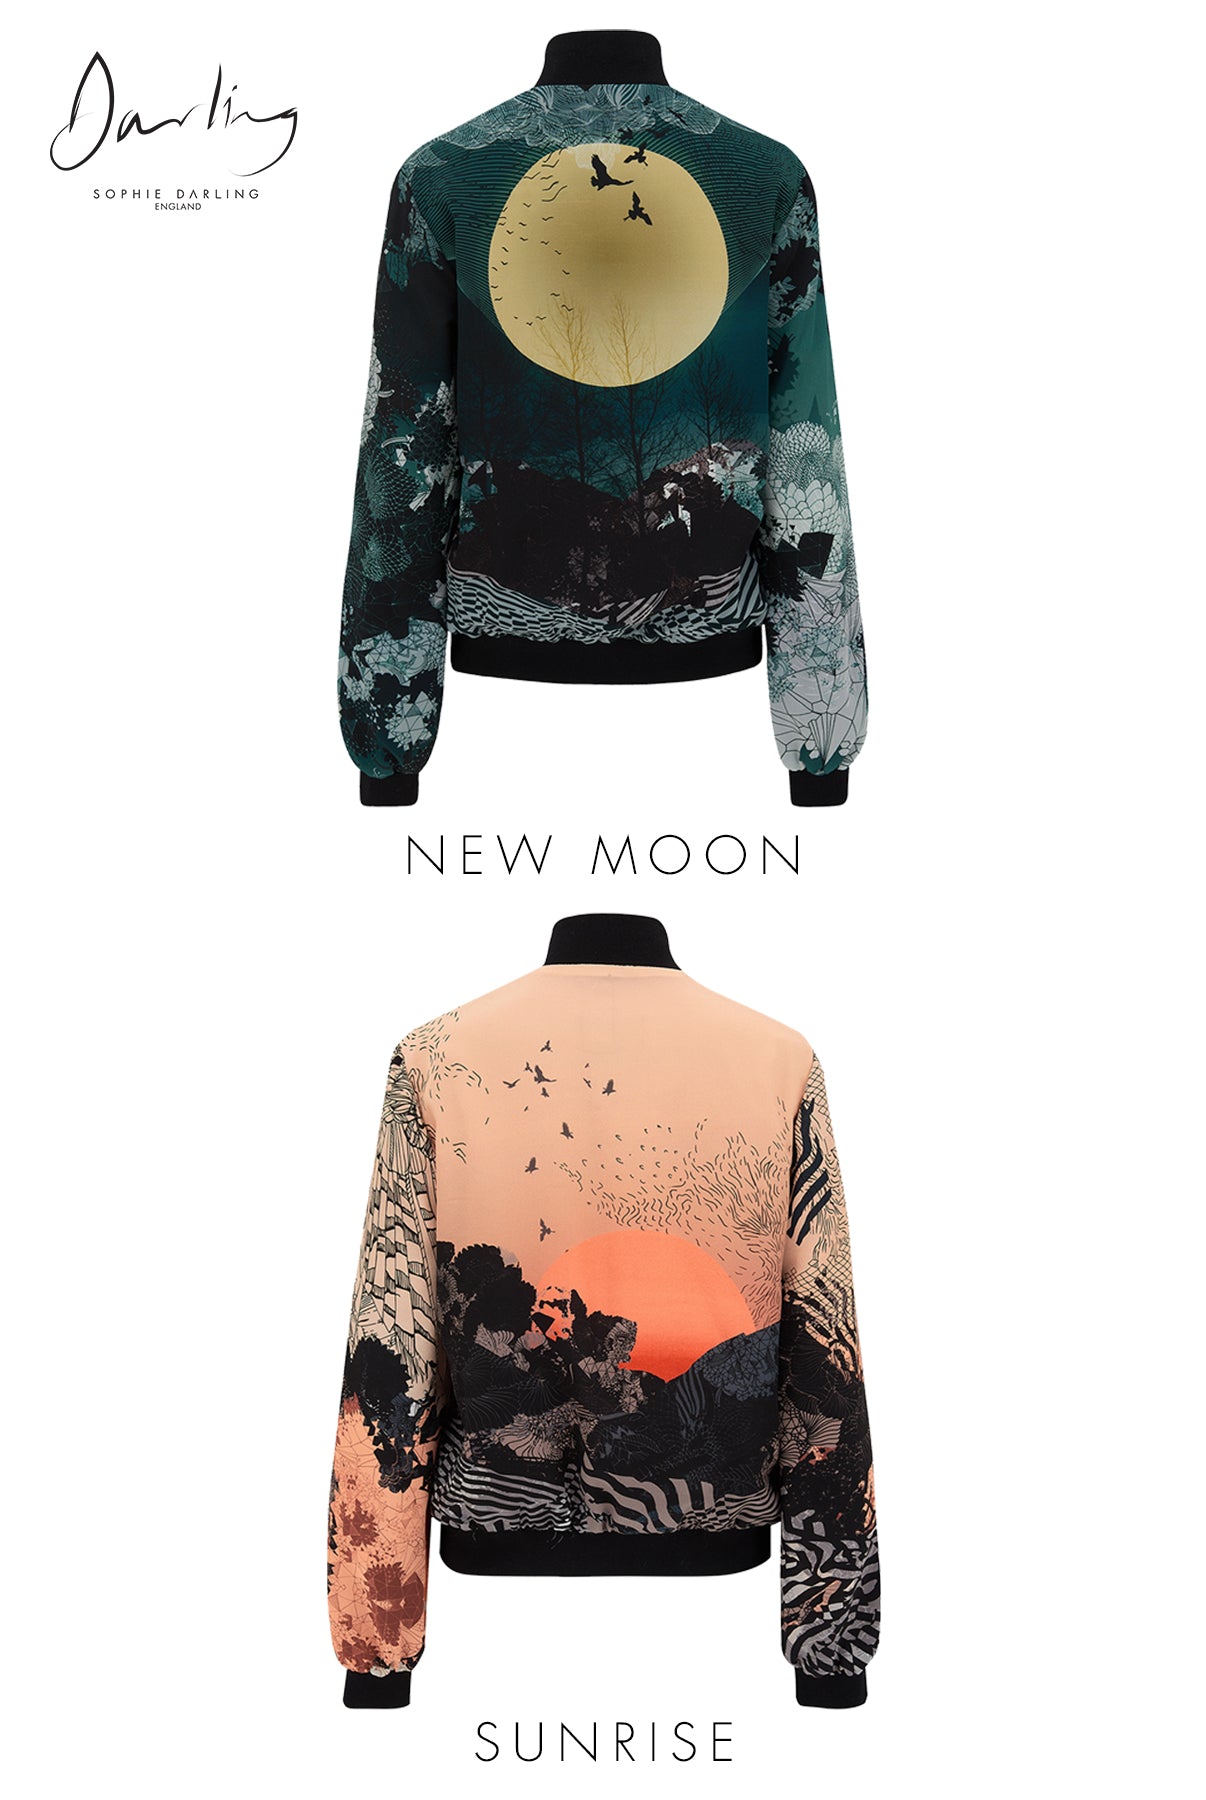 An image showing two reversible silk bomber jacket options, one in New Moon and one in Sunrise